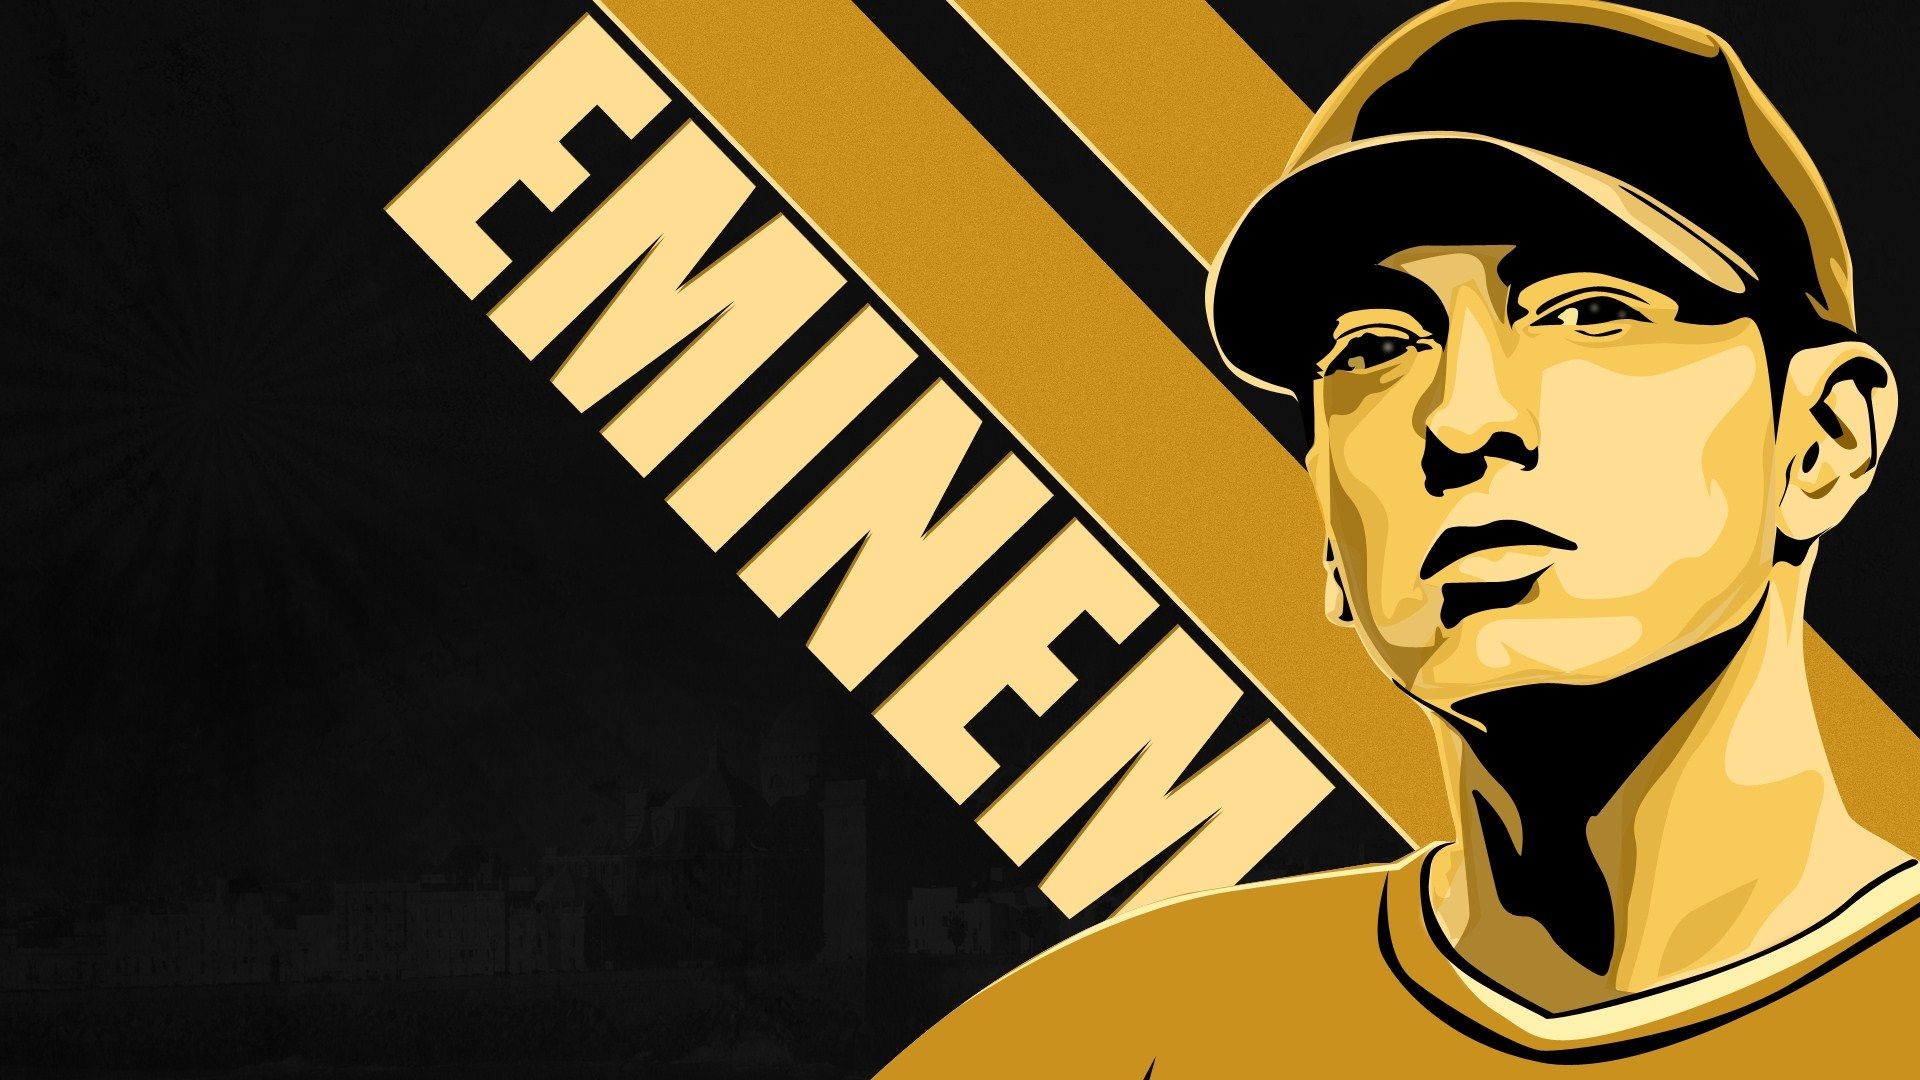 1920x1080 Eminem wallpapers high quality resolution